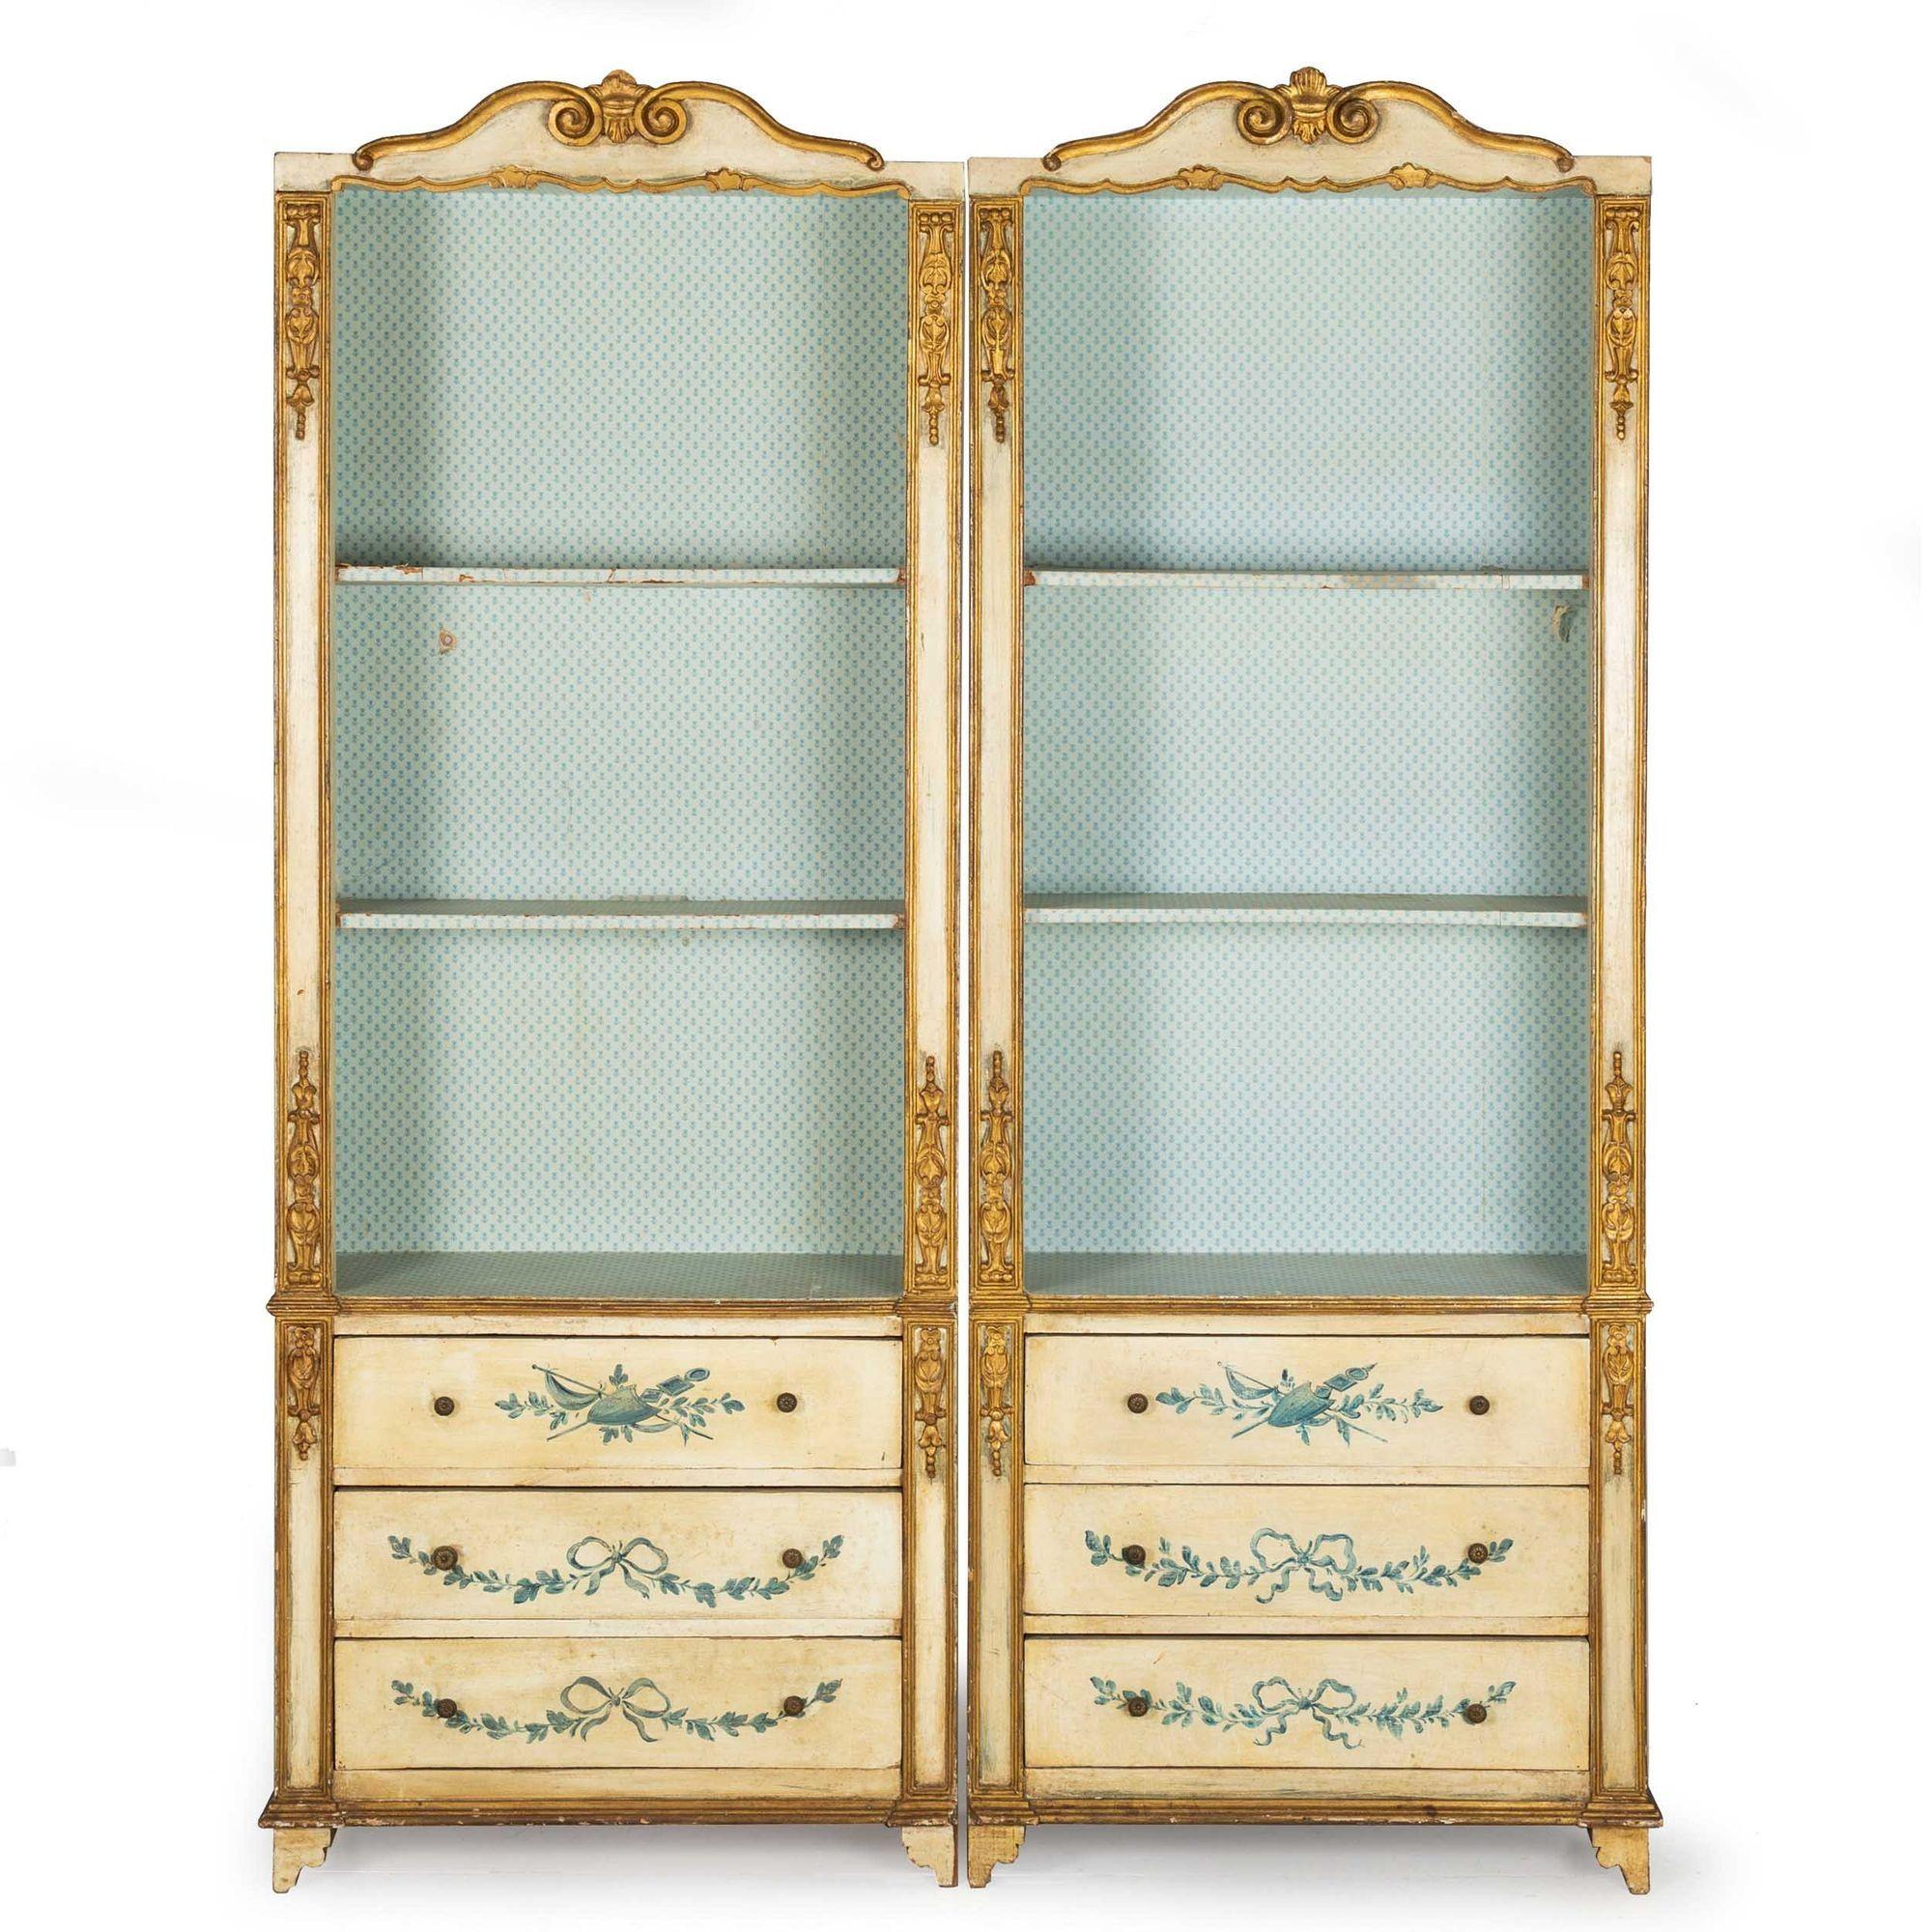 A delightful pair of 20th century bookcases in the Italian Neoclassical taste, they are whimsical and fun with applied giltwood moldings over nice paint decorated surfaces. They are comprised of an upper open bookshelf area with adjustable shelving